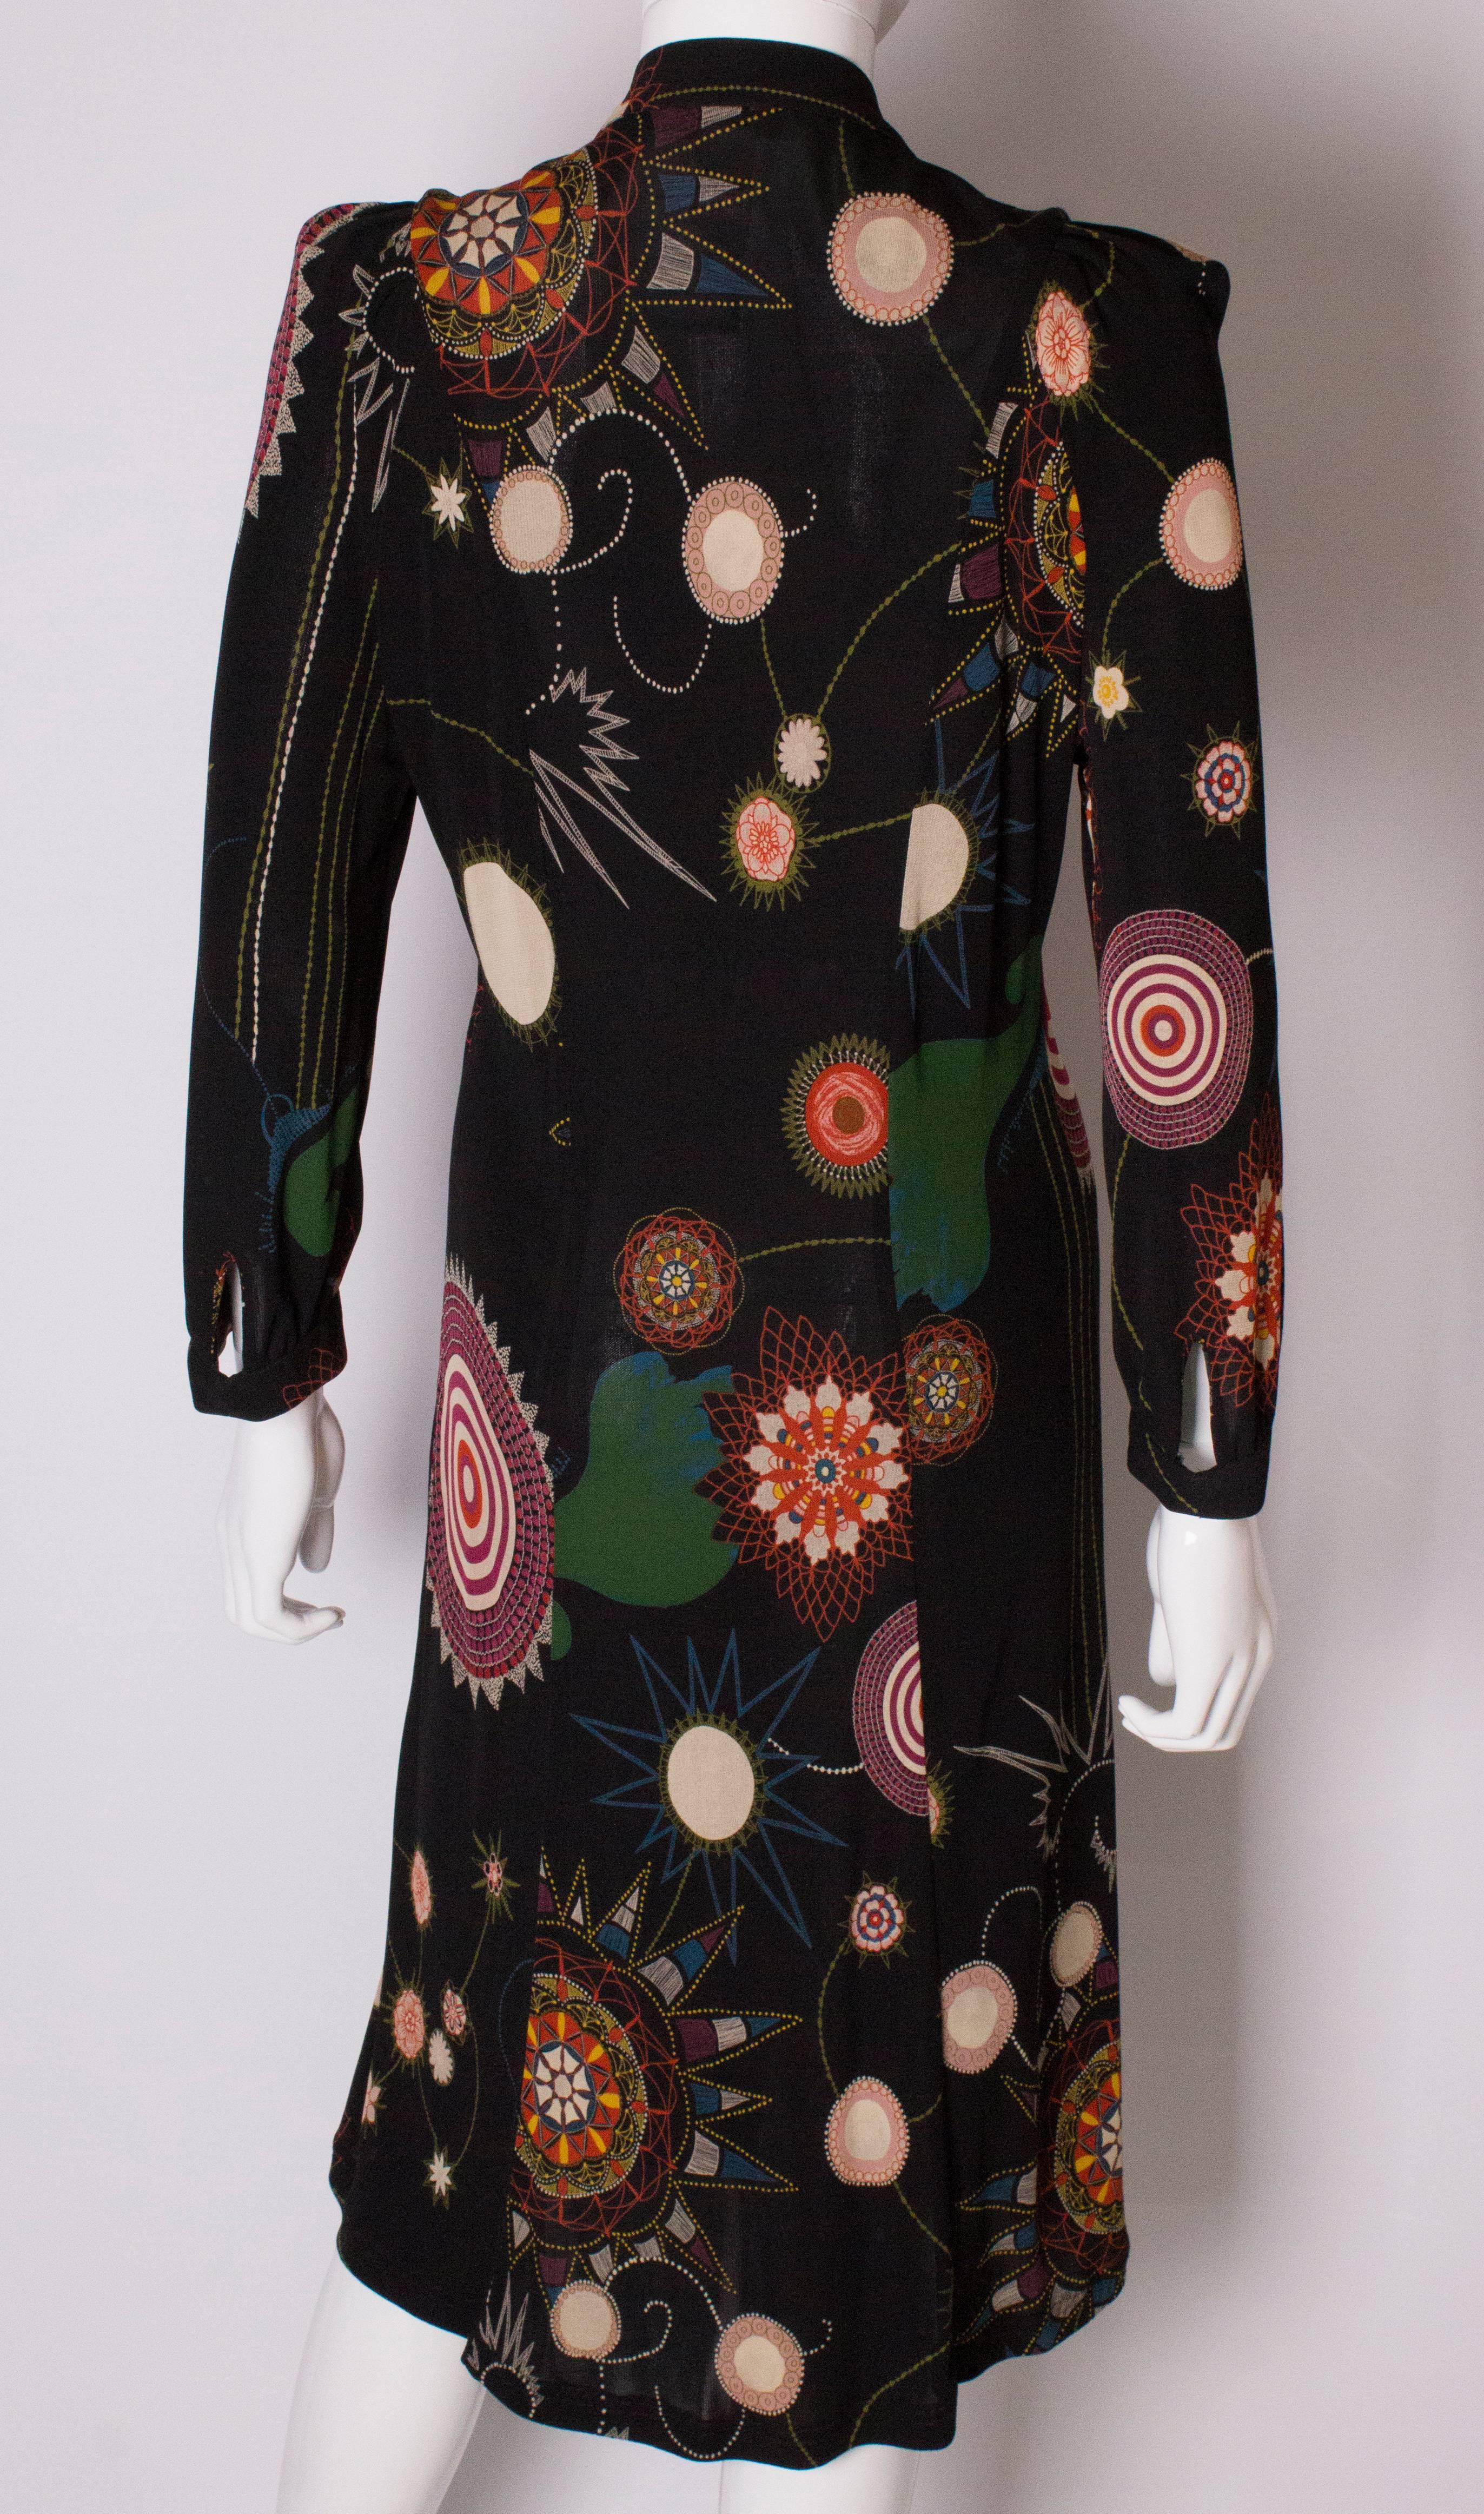 A Vintage 2000 printed  Dress by Christian Lacroix 3